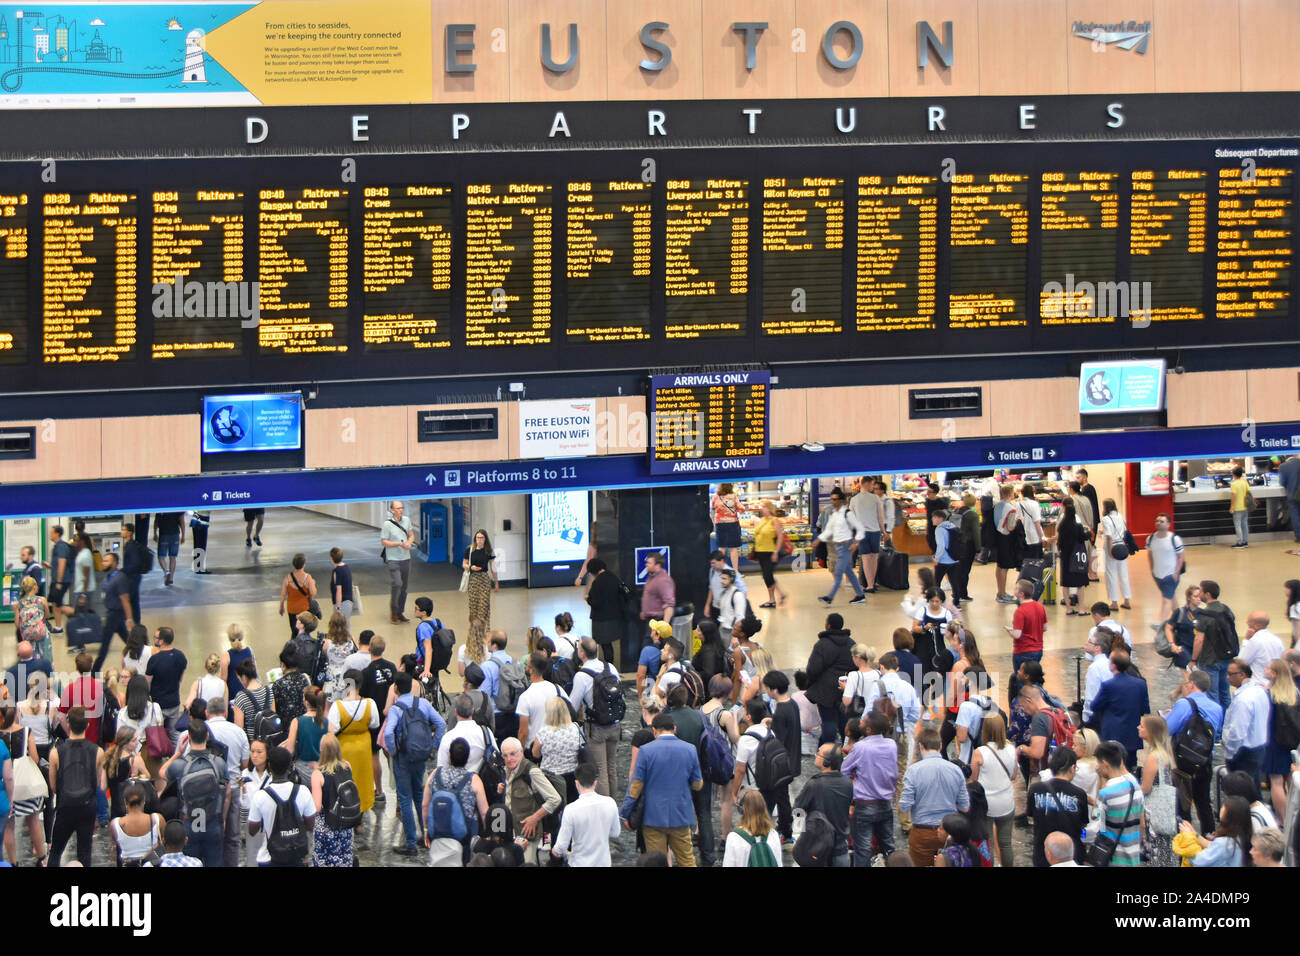 View from above looking down at interior of Euston railway station concourse with passengers viewing train departures & travel information London UK Stock Photo